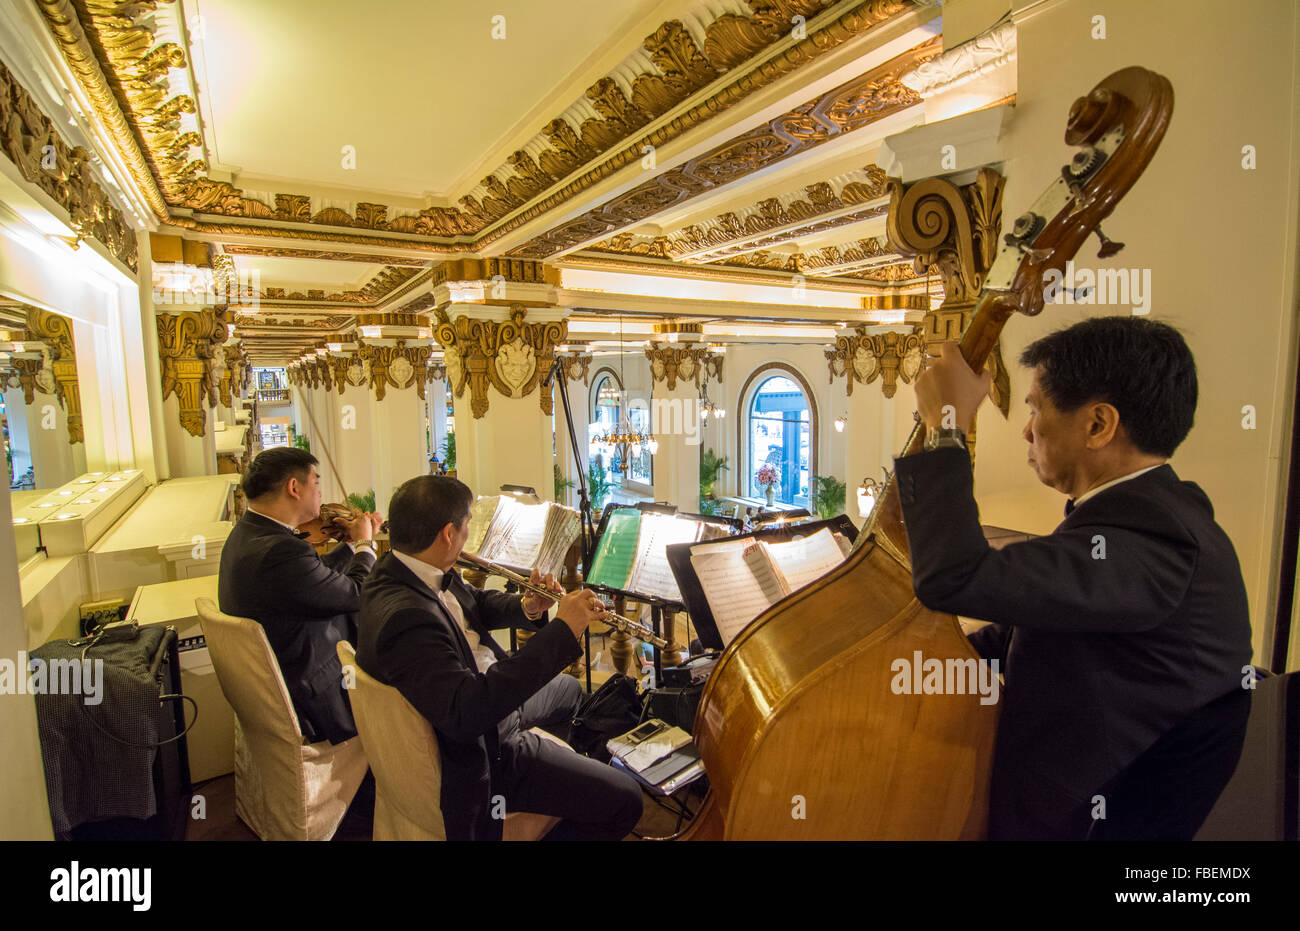 Hong Kong China  Peninsula Hotel orchestra playing at high tea in exclusive hotel from above lobby with music Stock Photo